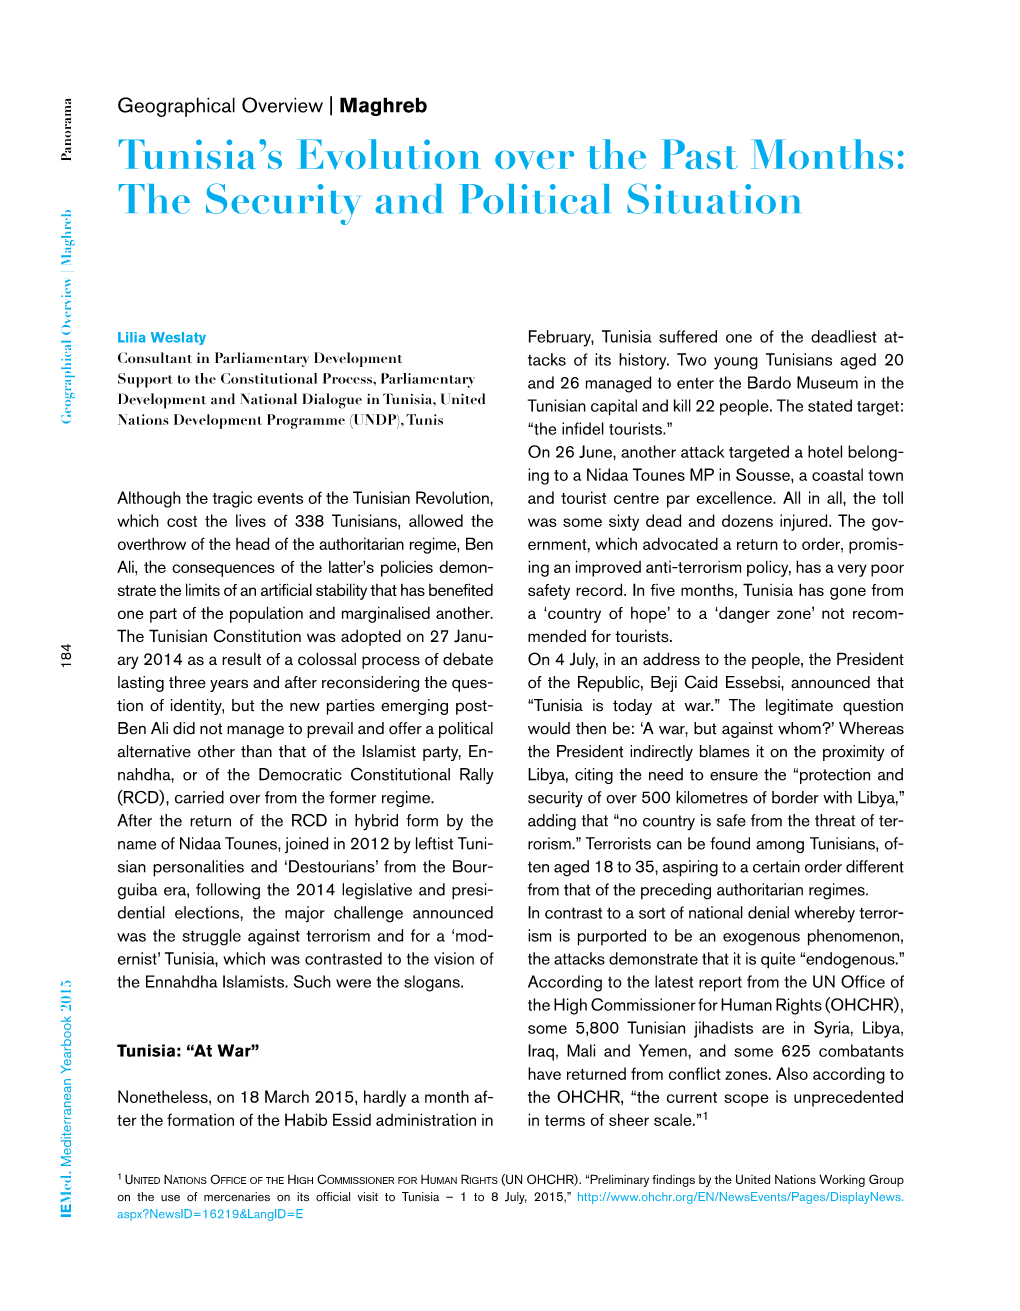 Tunisia's Evolution Over the Past Months: the Security and Political Situation